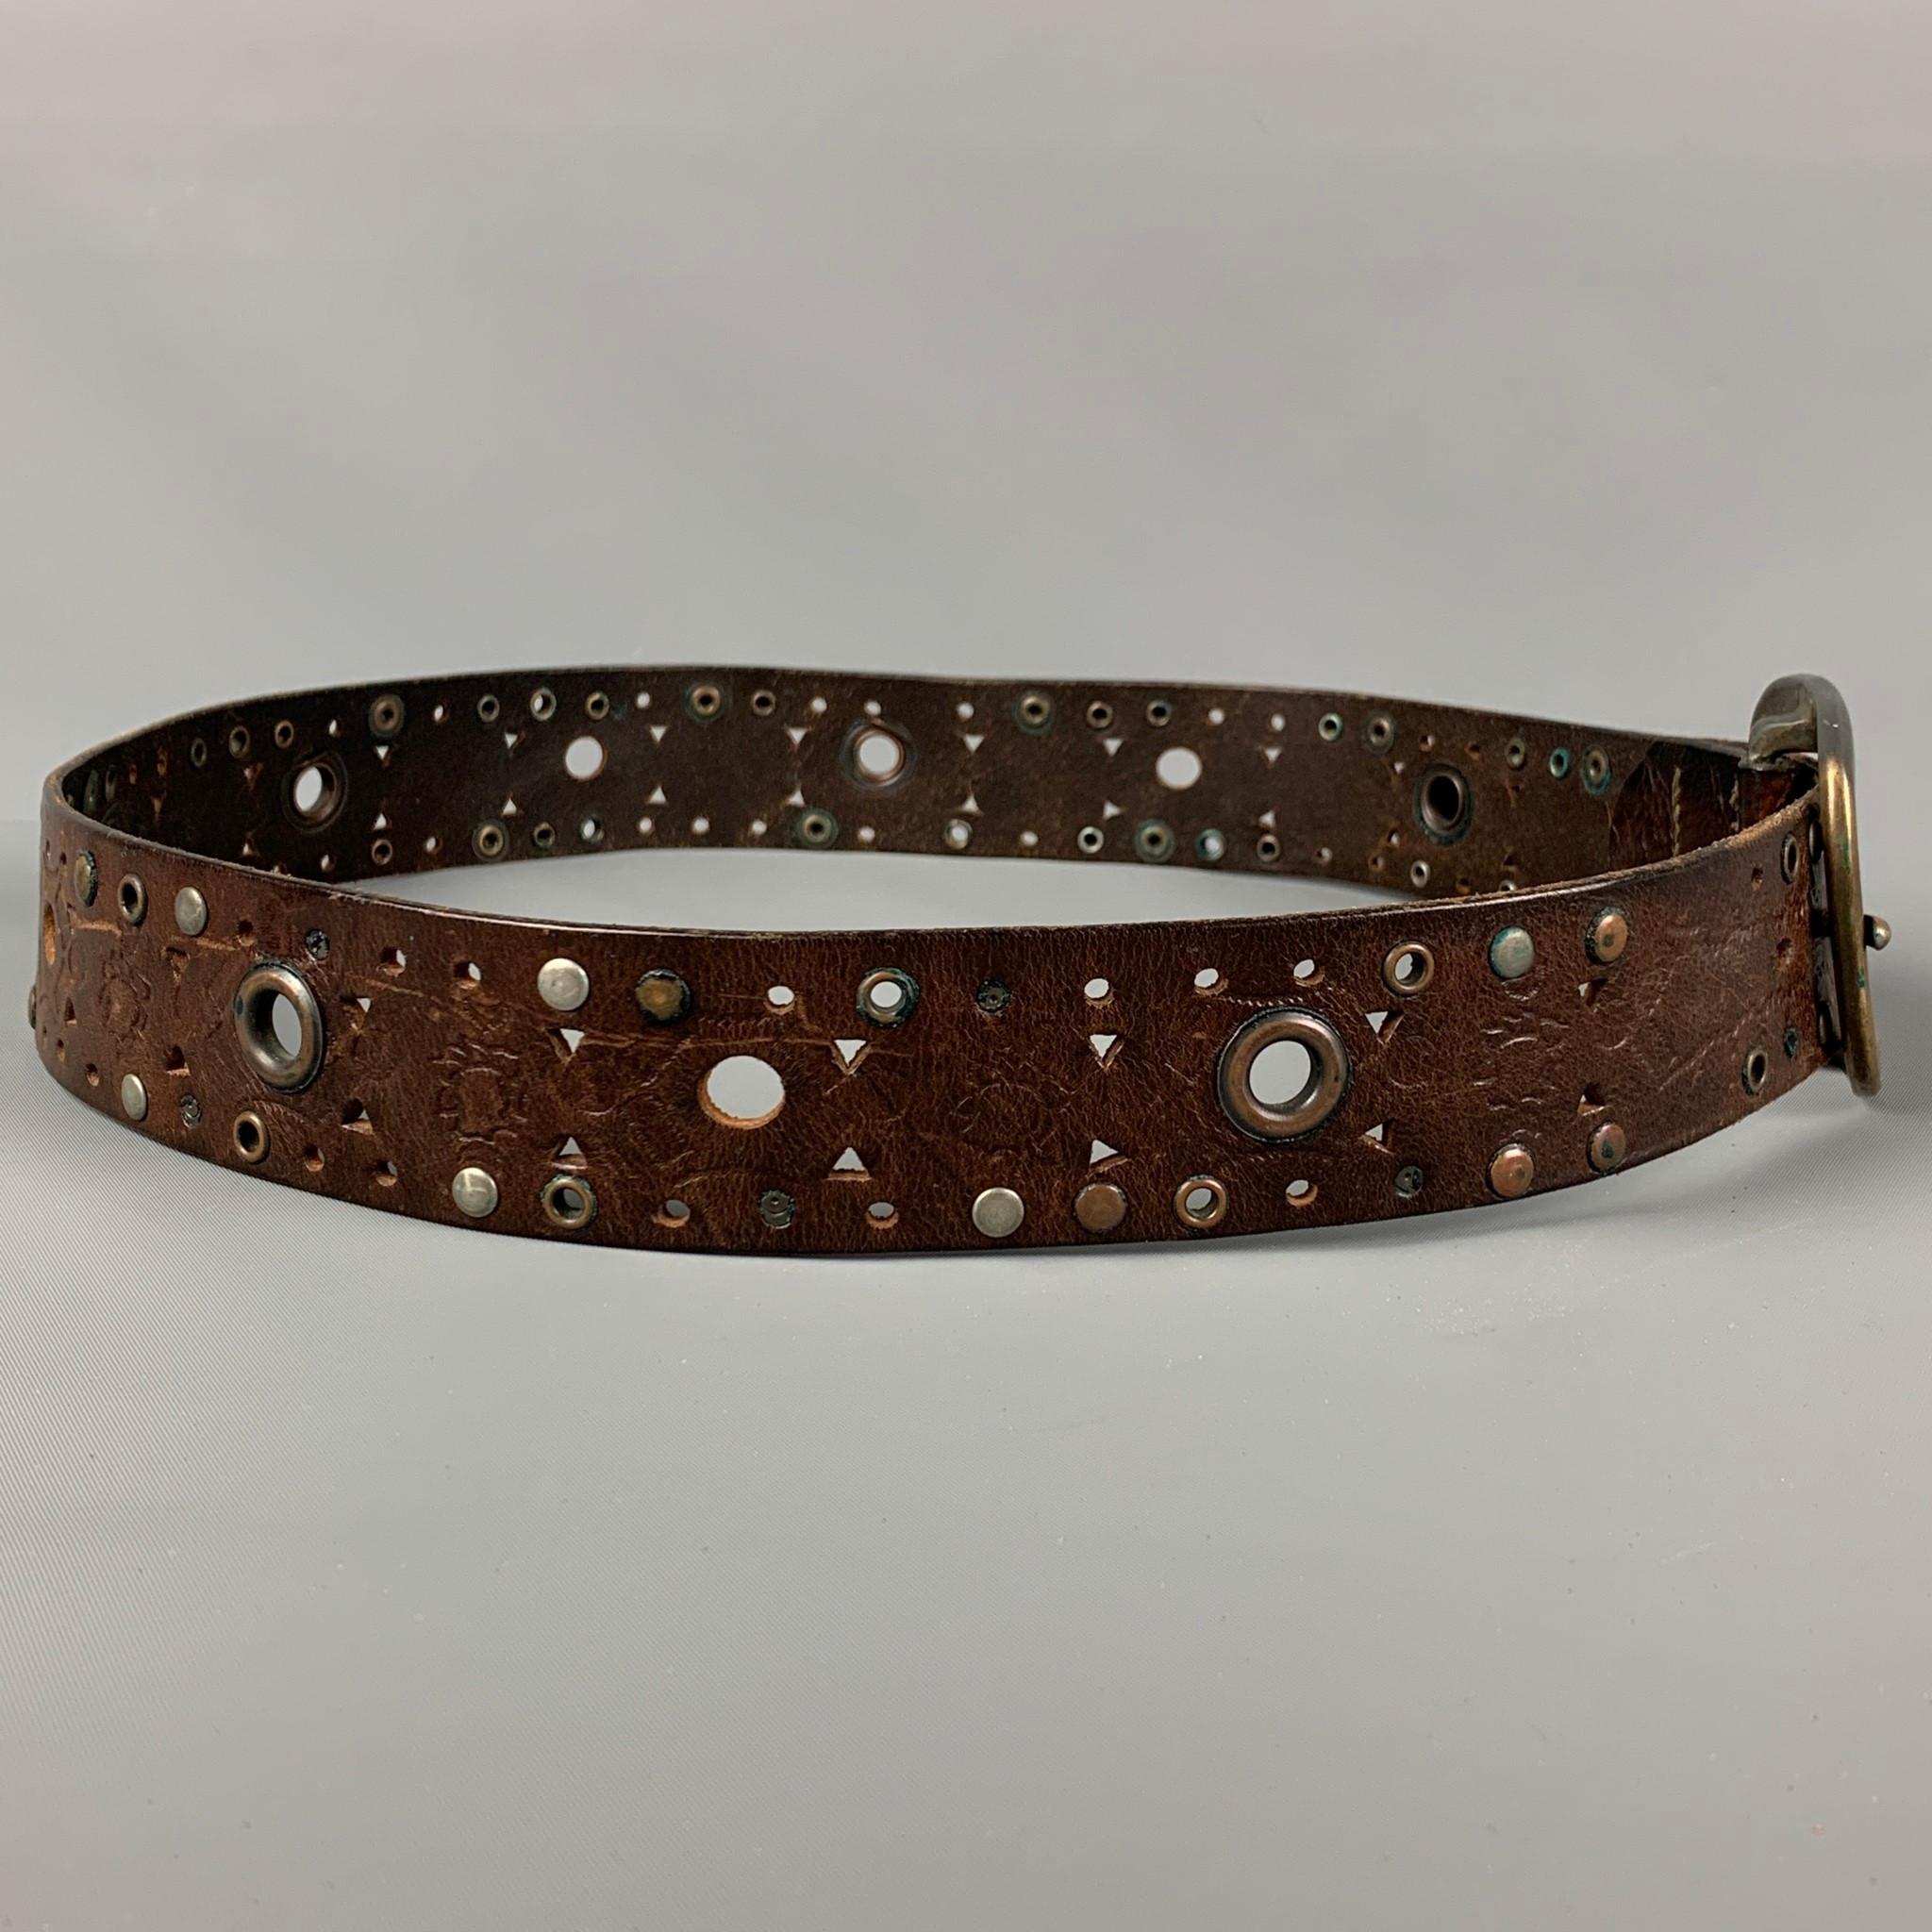 DSQUARED2 belt comes in a brown perforated leather featuring studded details and a buckle closure. Made in Italy. 

Good Pre-Owned Condition. Minor wear.
Marked: M

Length: 43 in.
Width: 1.5 in.
Fits: 36 in. - 40 in.
Buckle: 3.25 in. 